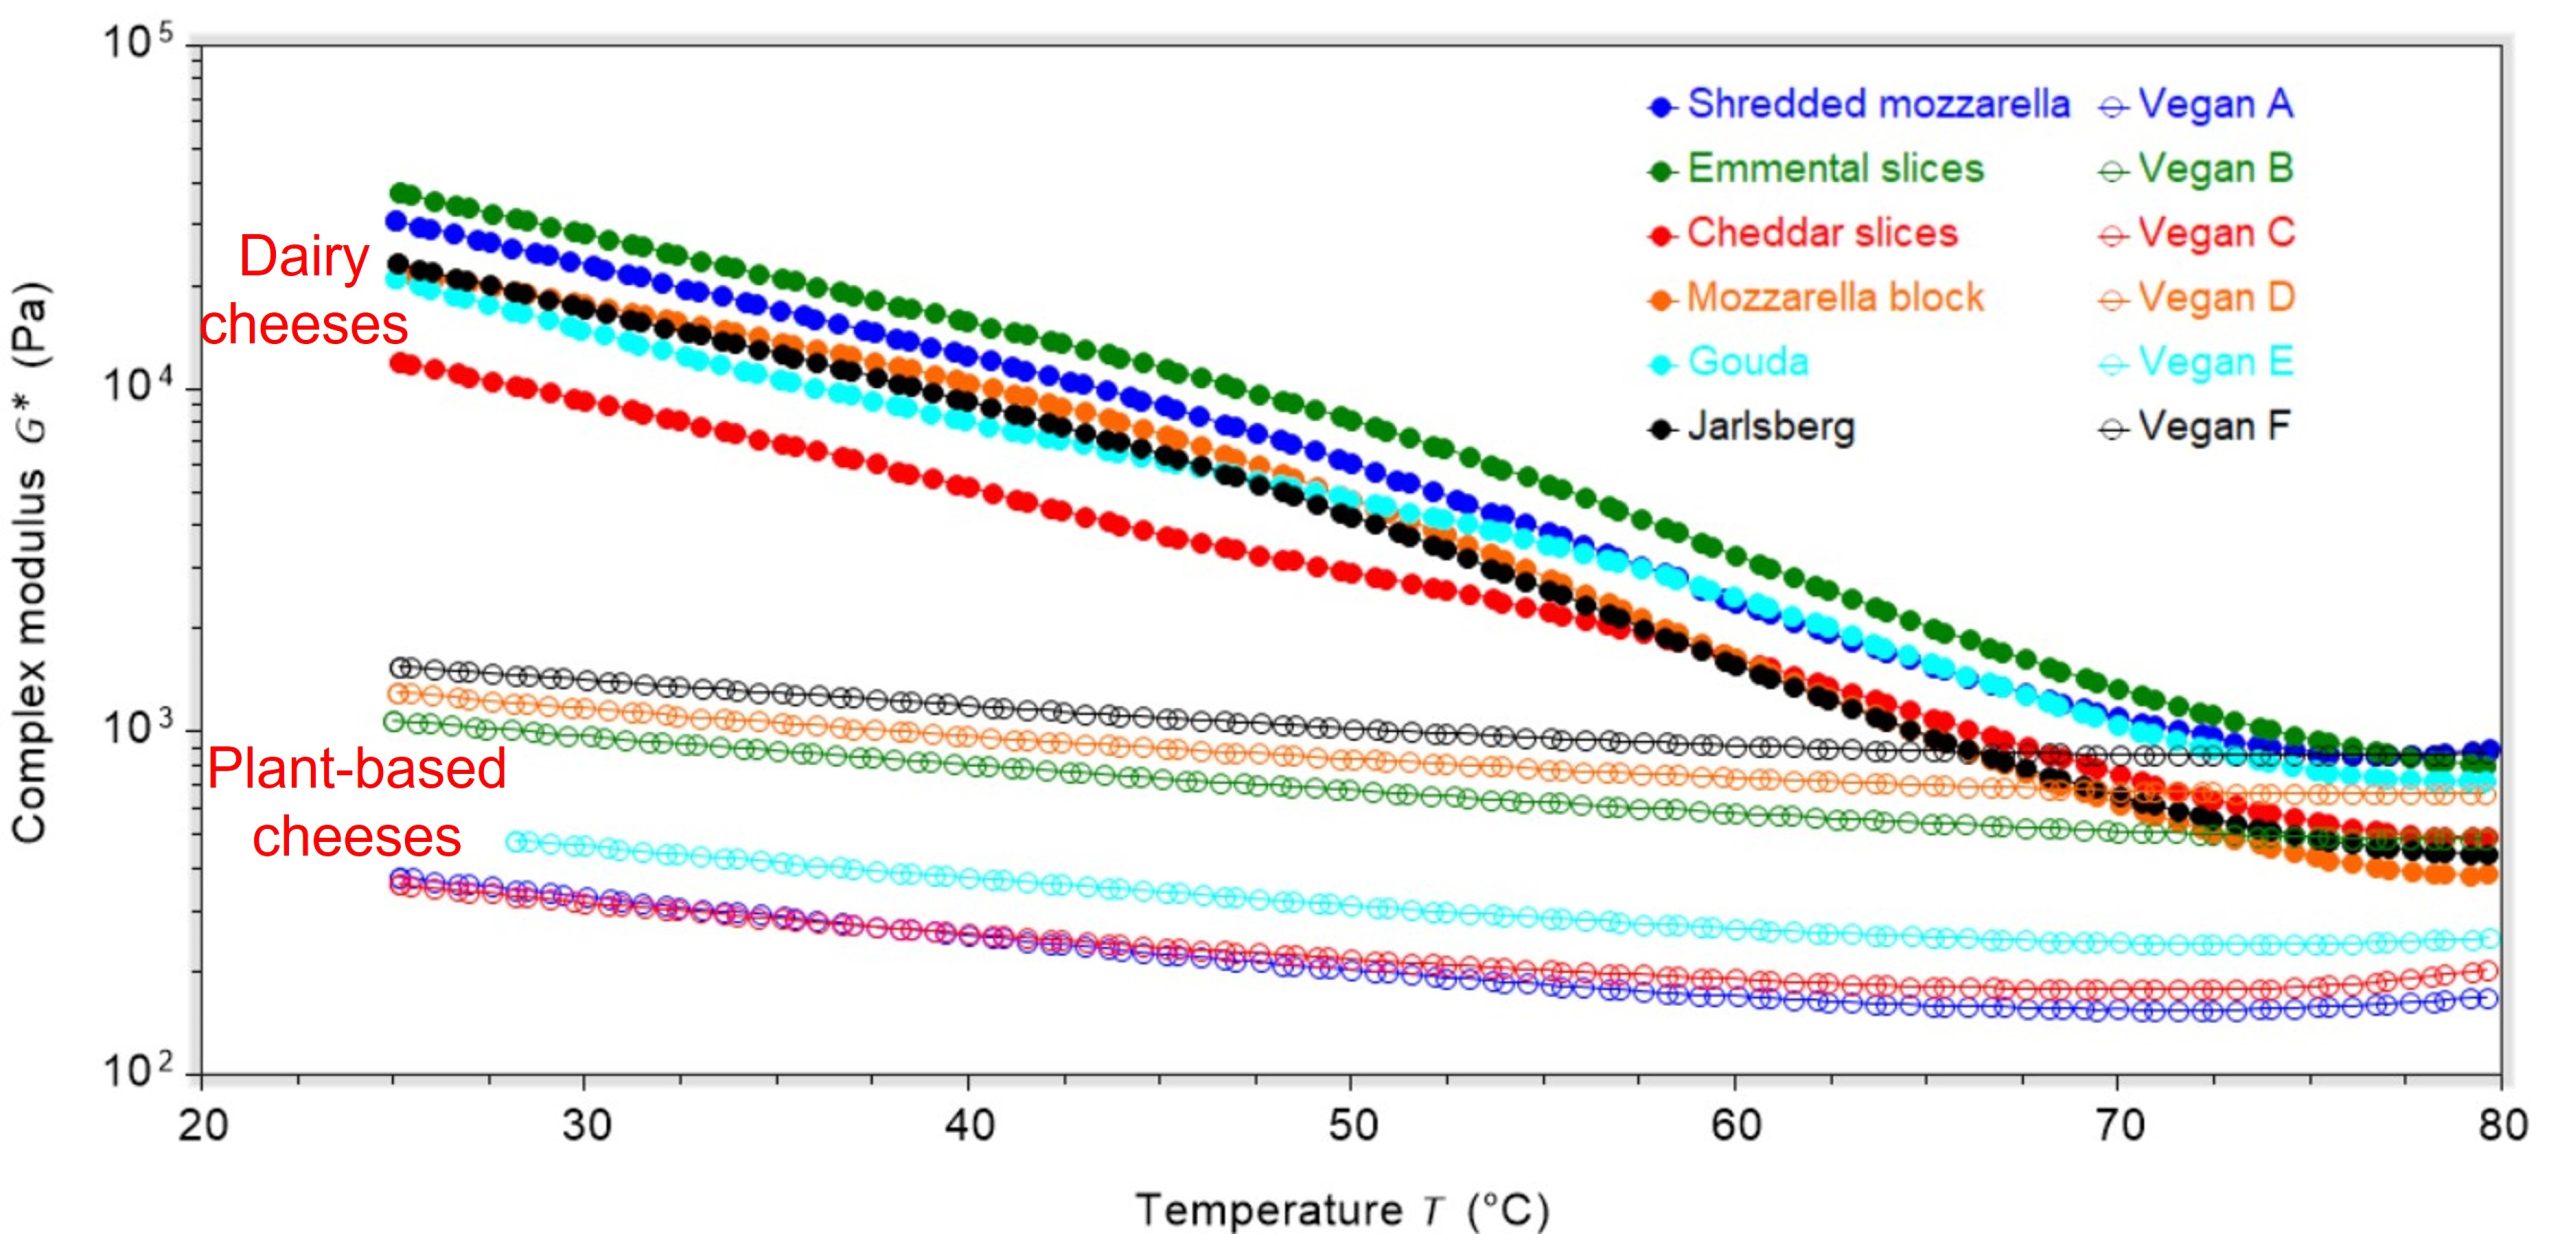 complex modulus between 20 and 80 °C for dairy and plant-based cheeses